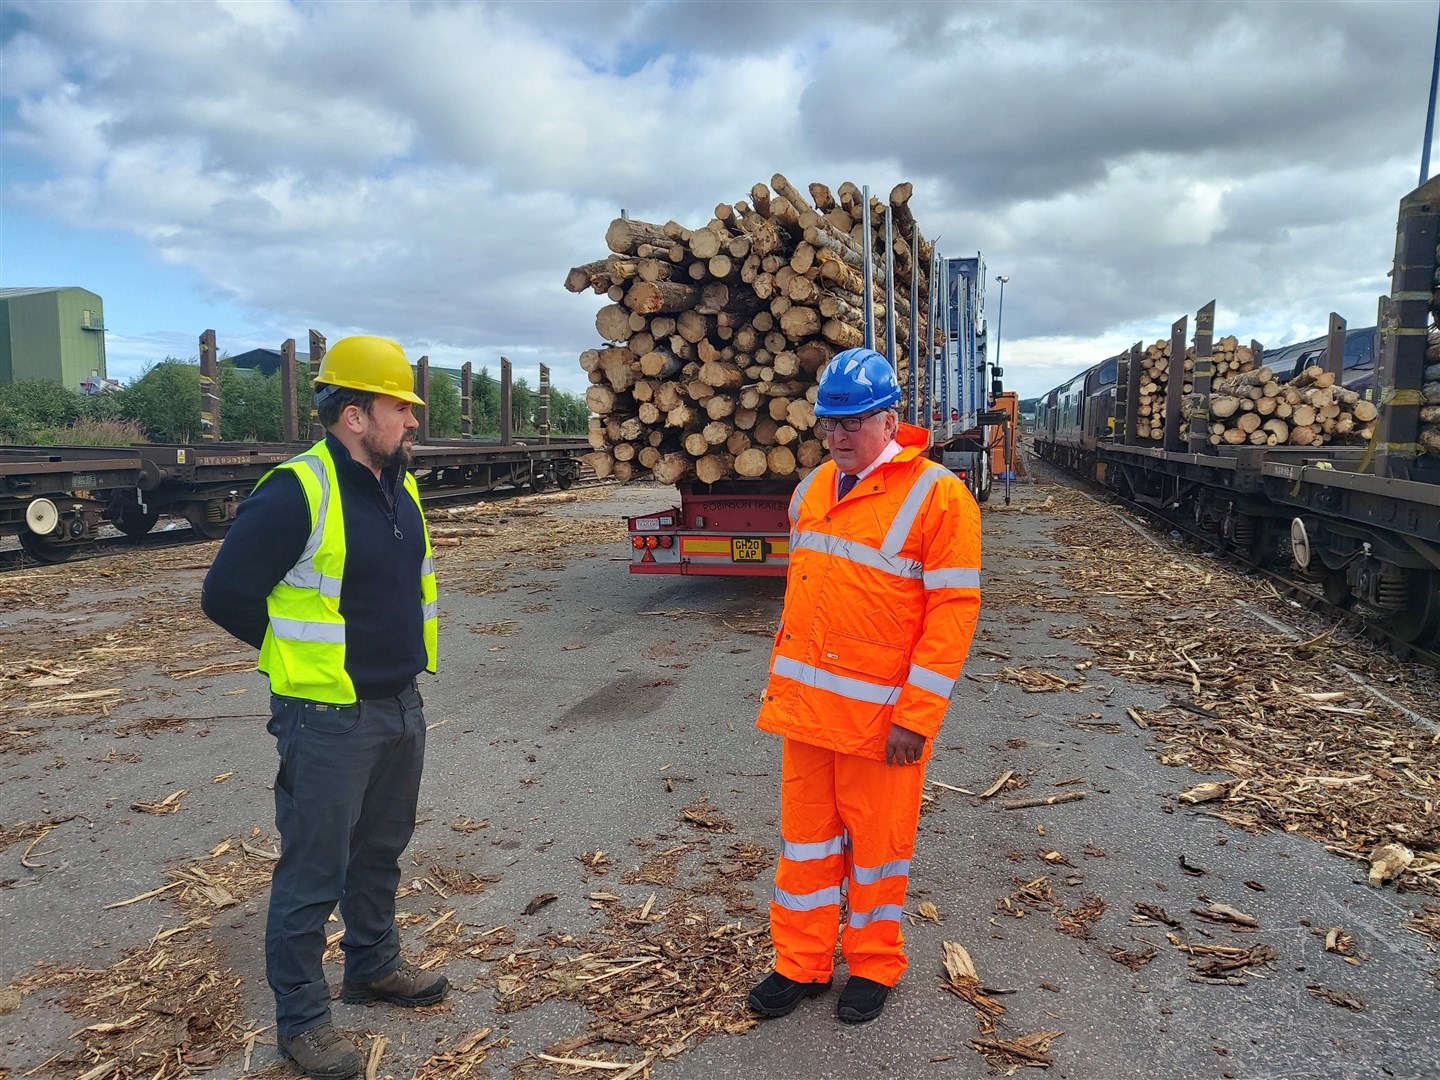 Matthew Thompson of Munro Harvesting (left) discusses the Timber by Rail project with Rural Economy Secretary Fergus Ewing at the Inverness Yard.